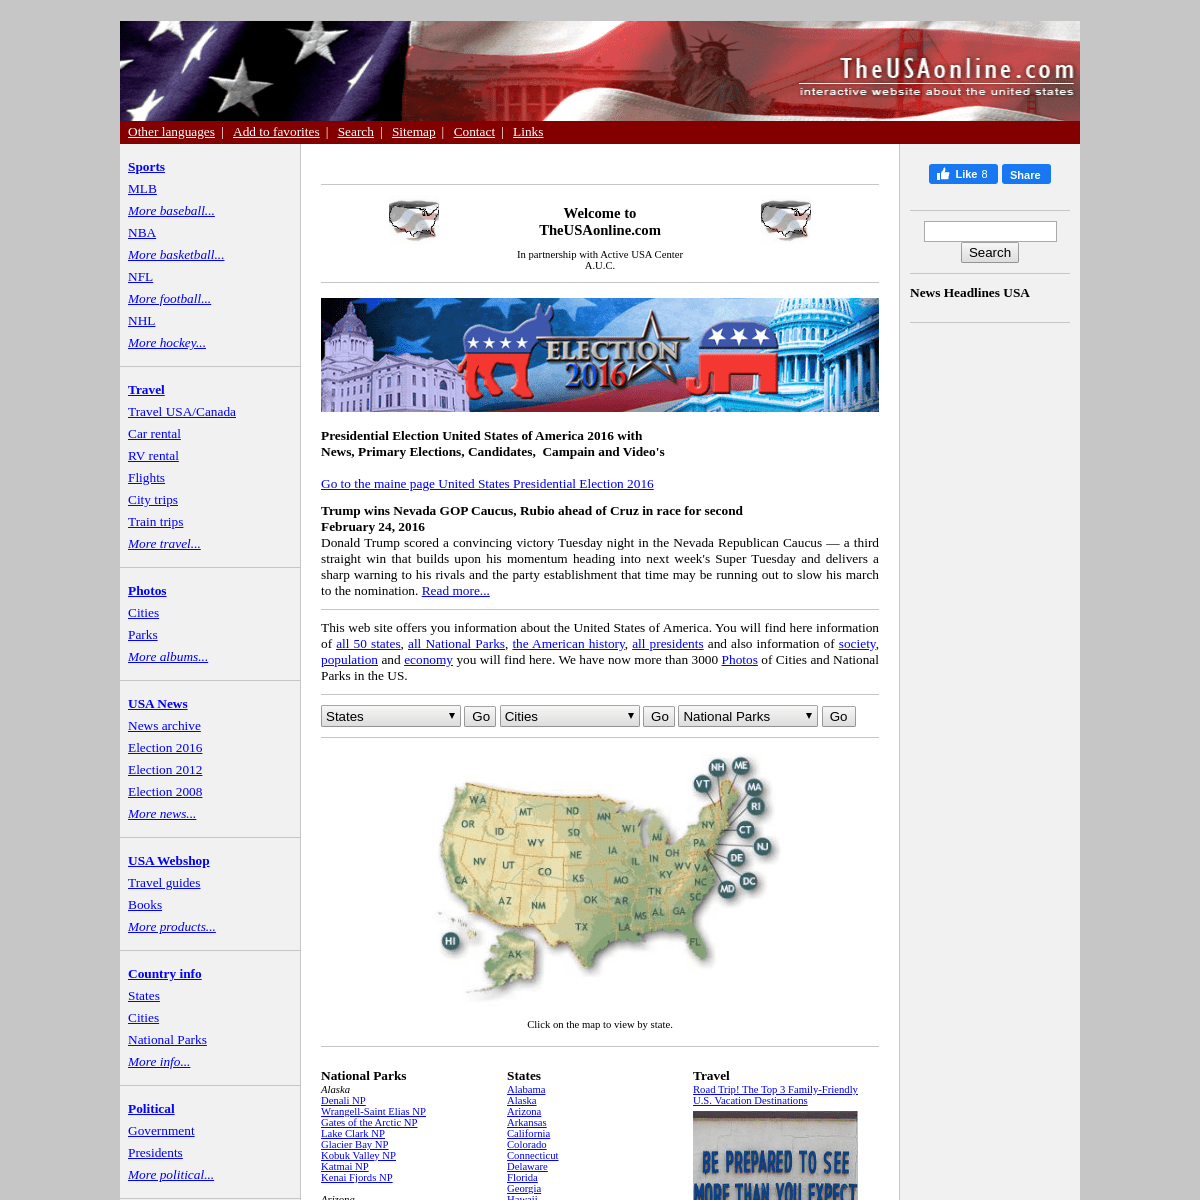 A complete backup of theusaonline.com